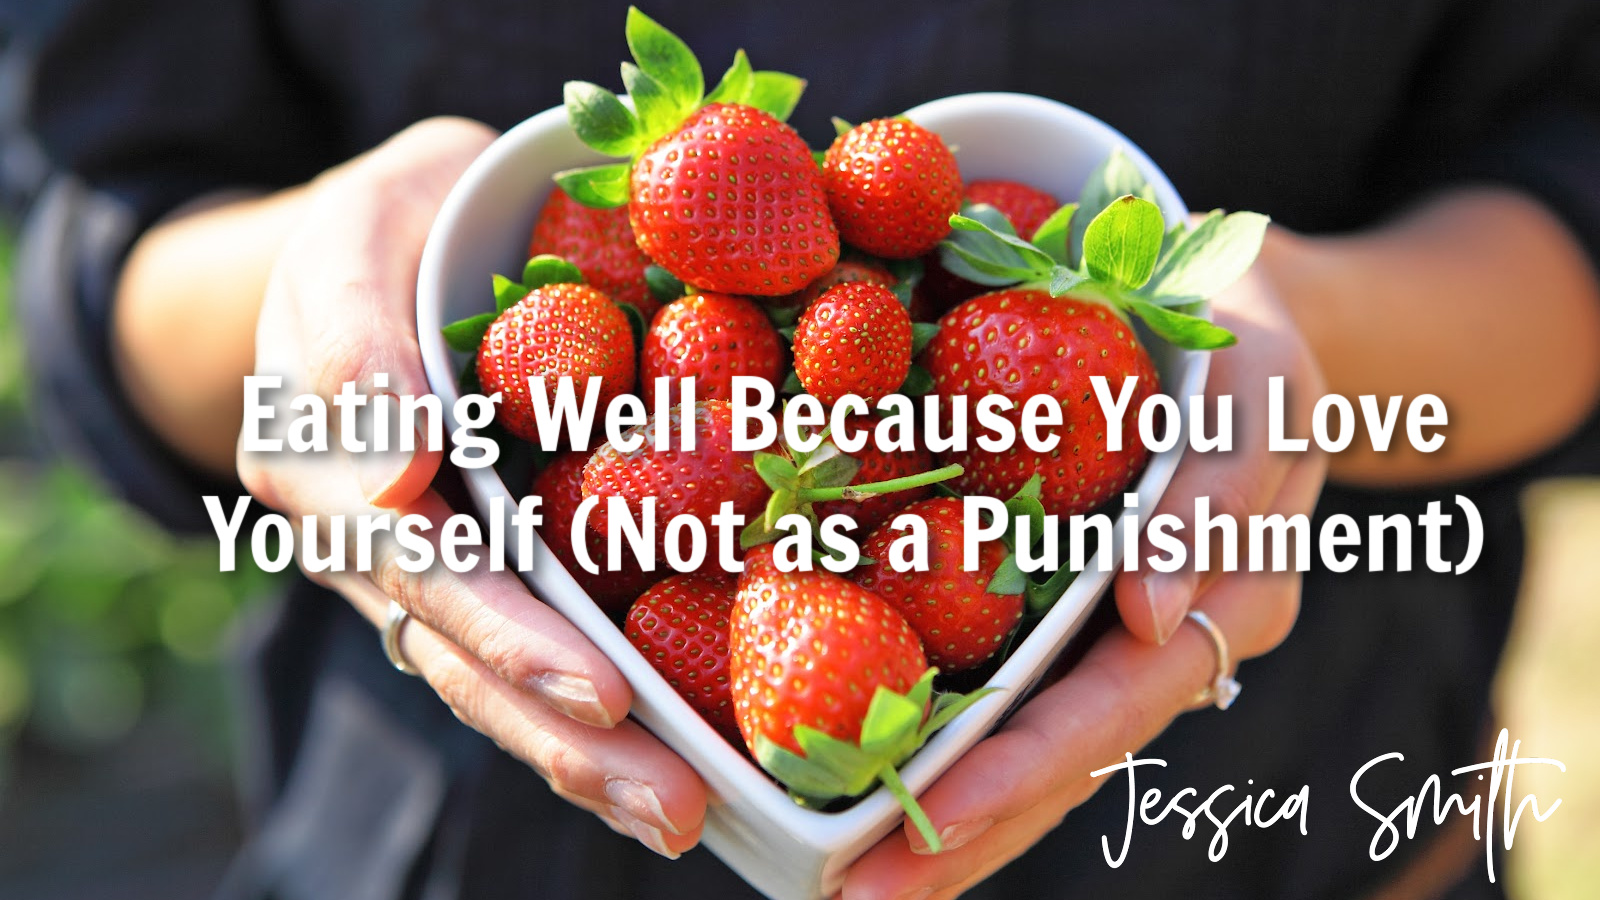 Eating Well Because You Love Yourself (Not as a Punishment)